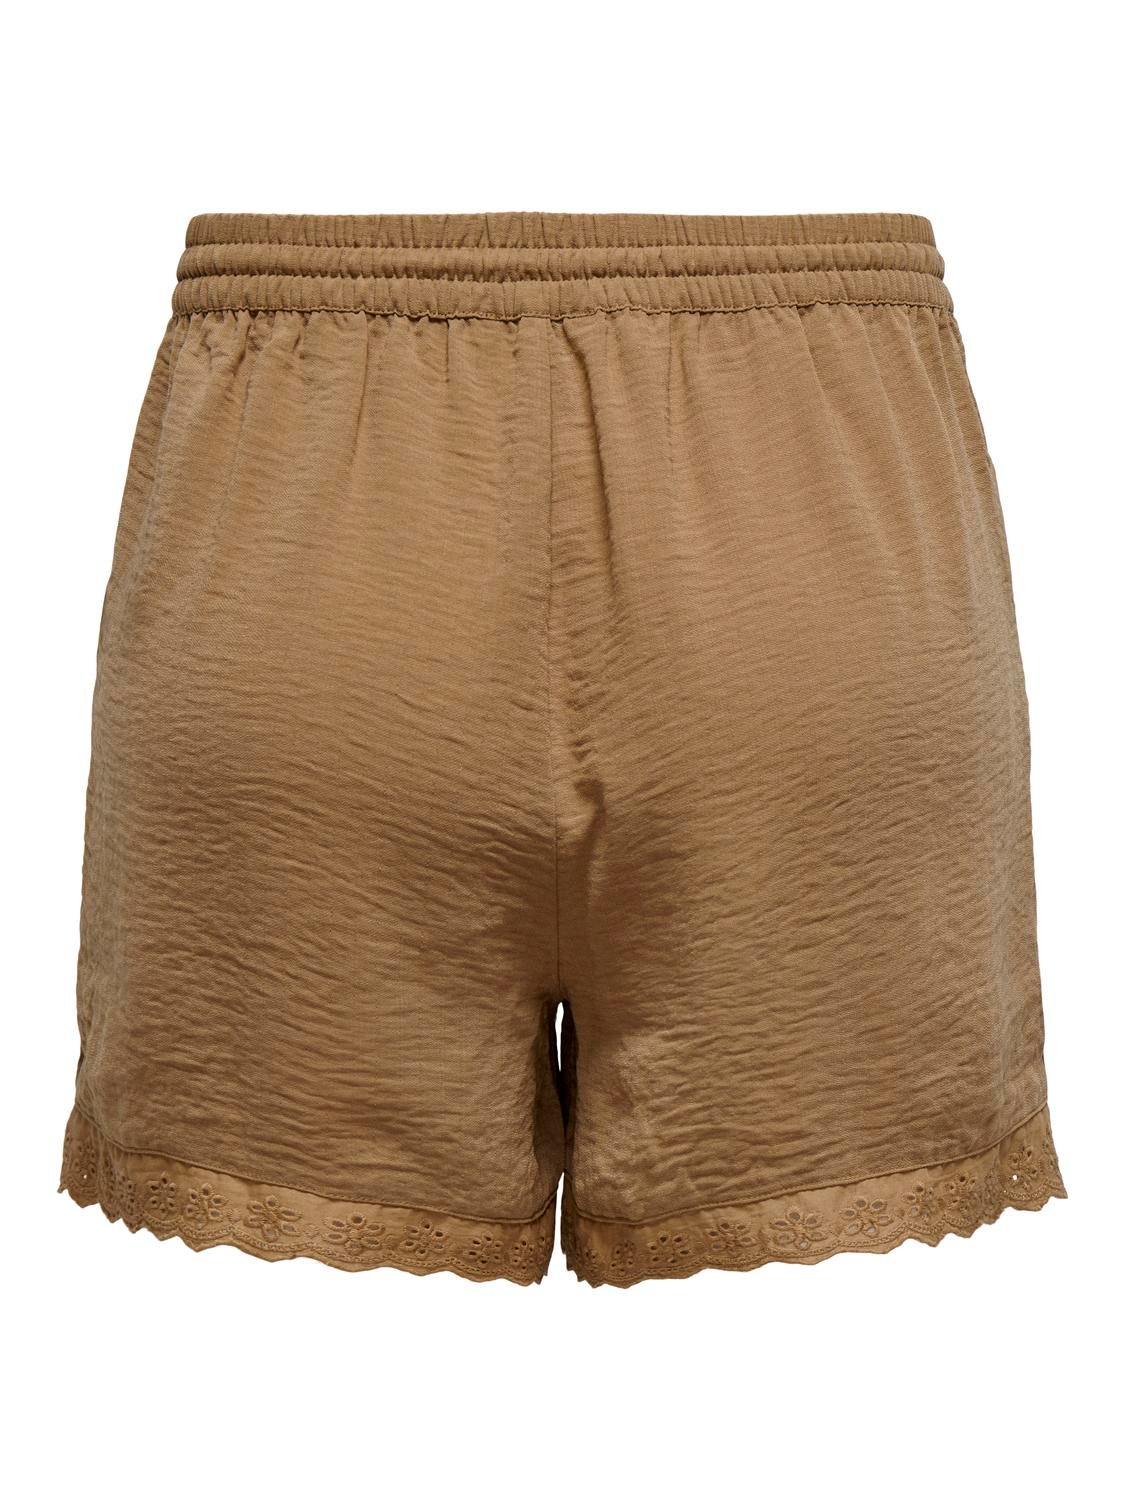 ONLY Shorts med Blondekant -Toasted Coconut - 15295675